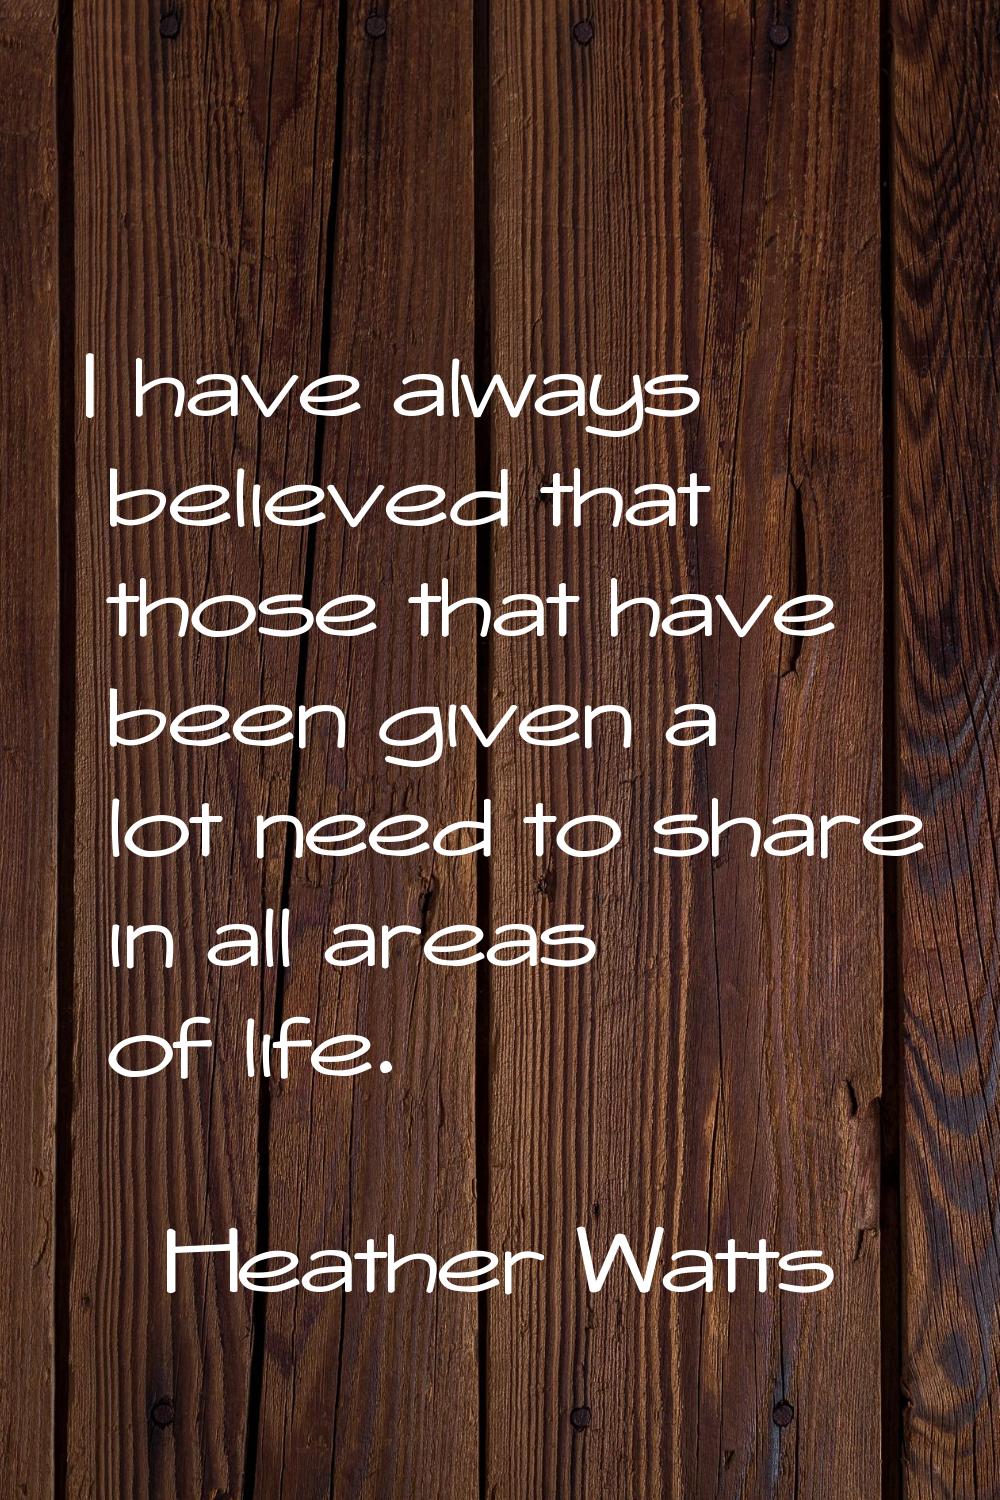 I have always believed that those that have been given a lot need to share in all areas of life.